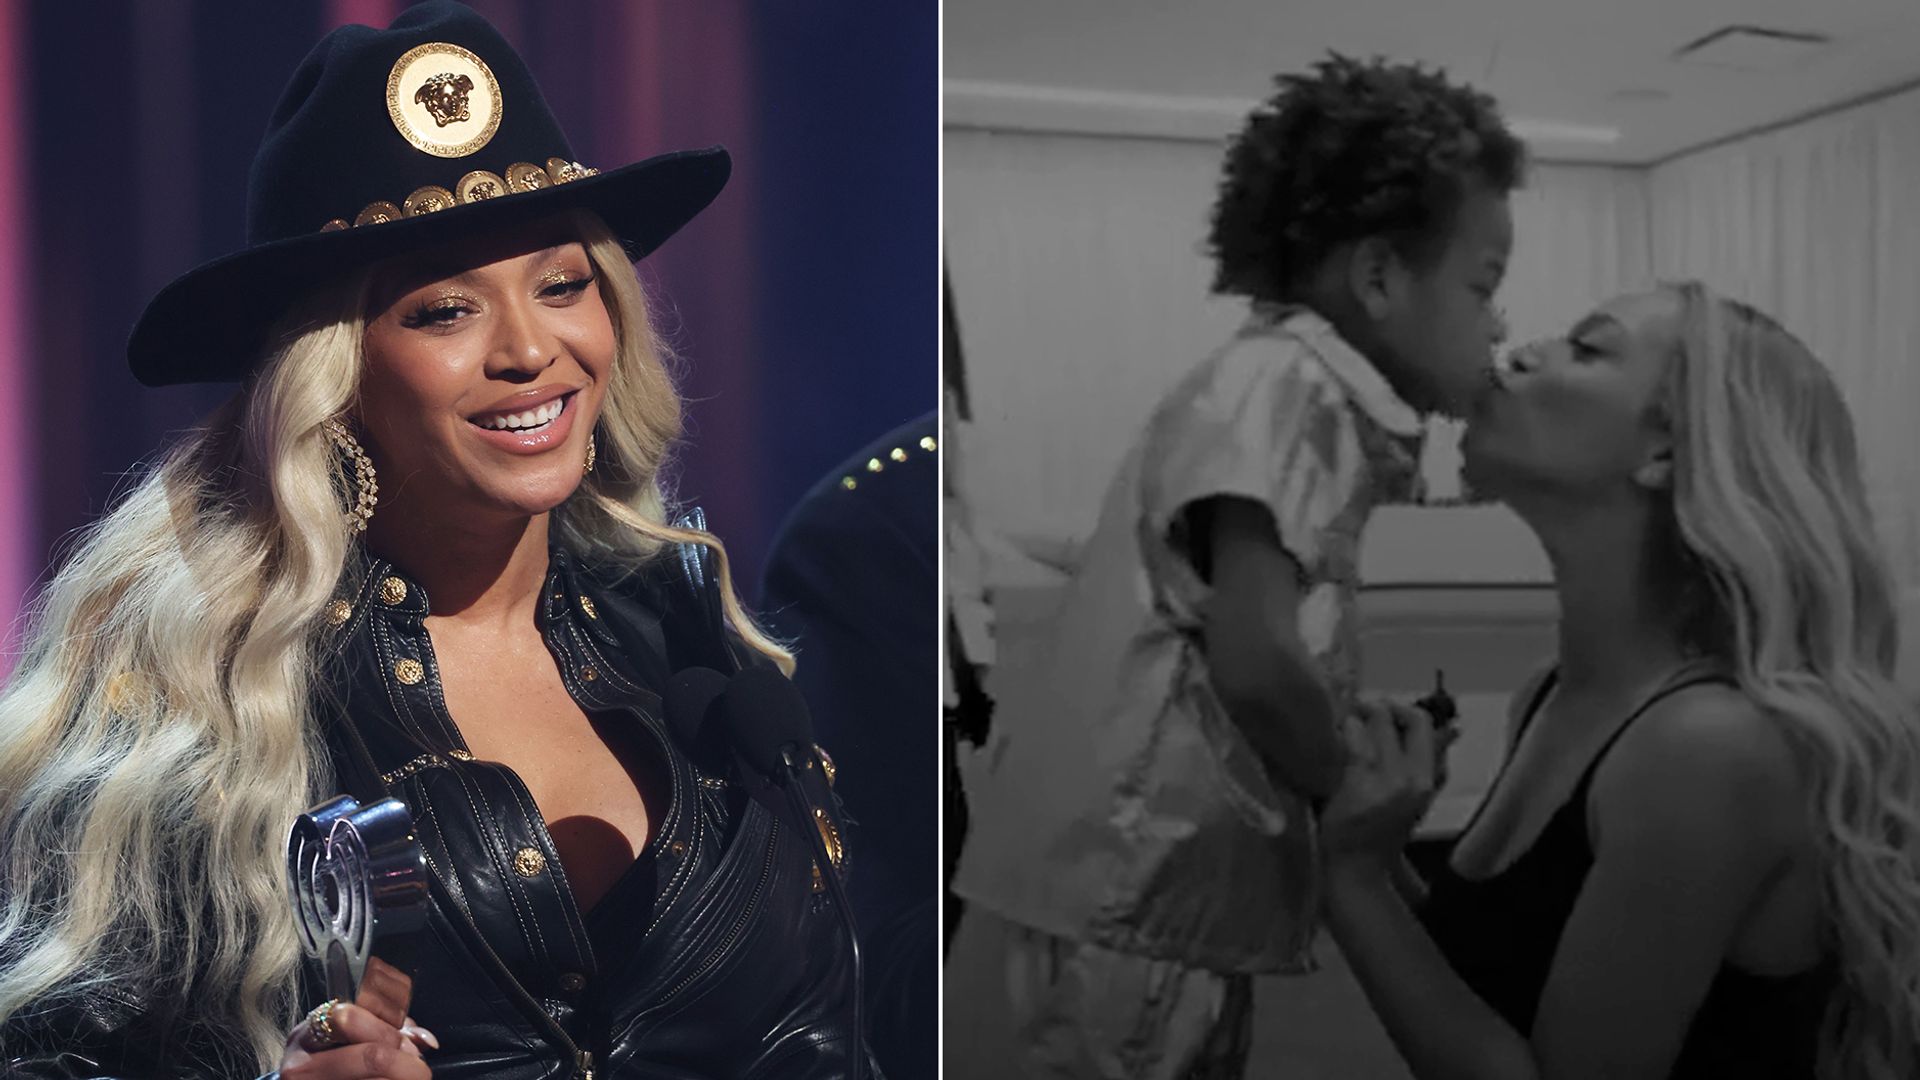 Beyonce at iHeart Radio Awards and with her son, Sir